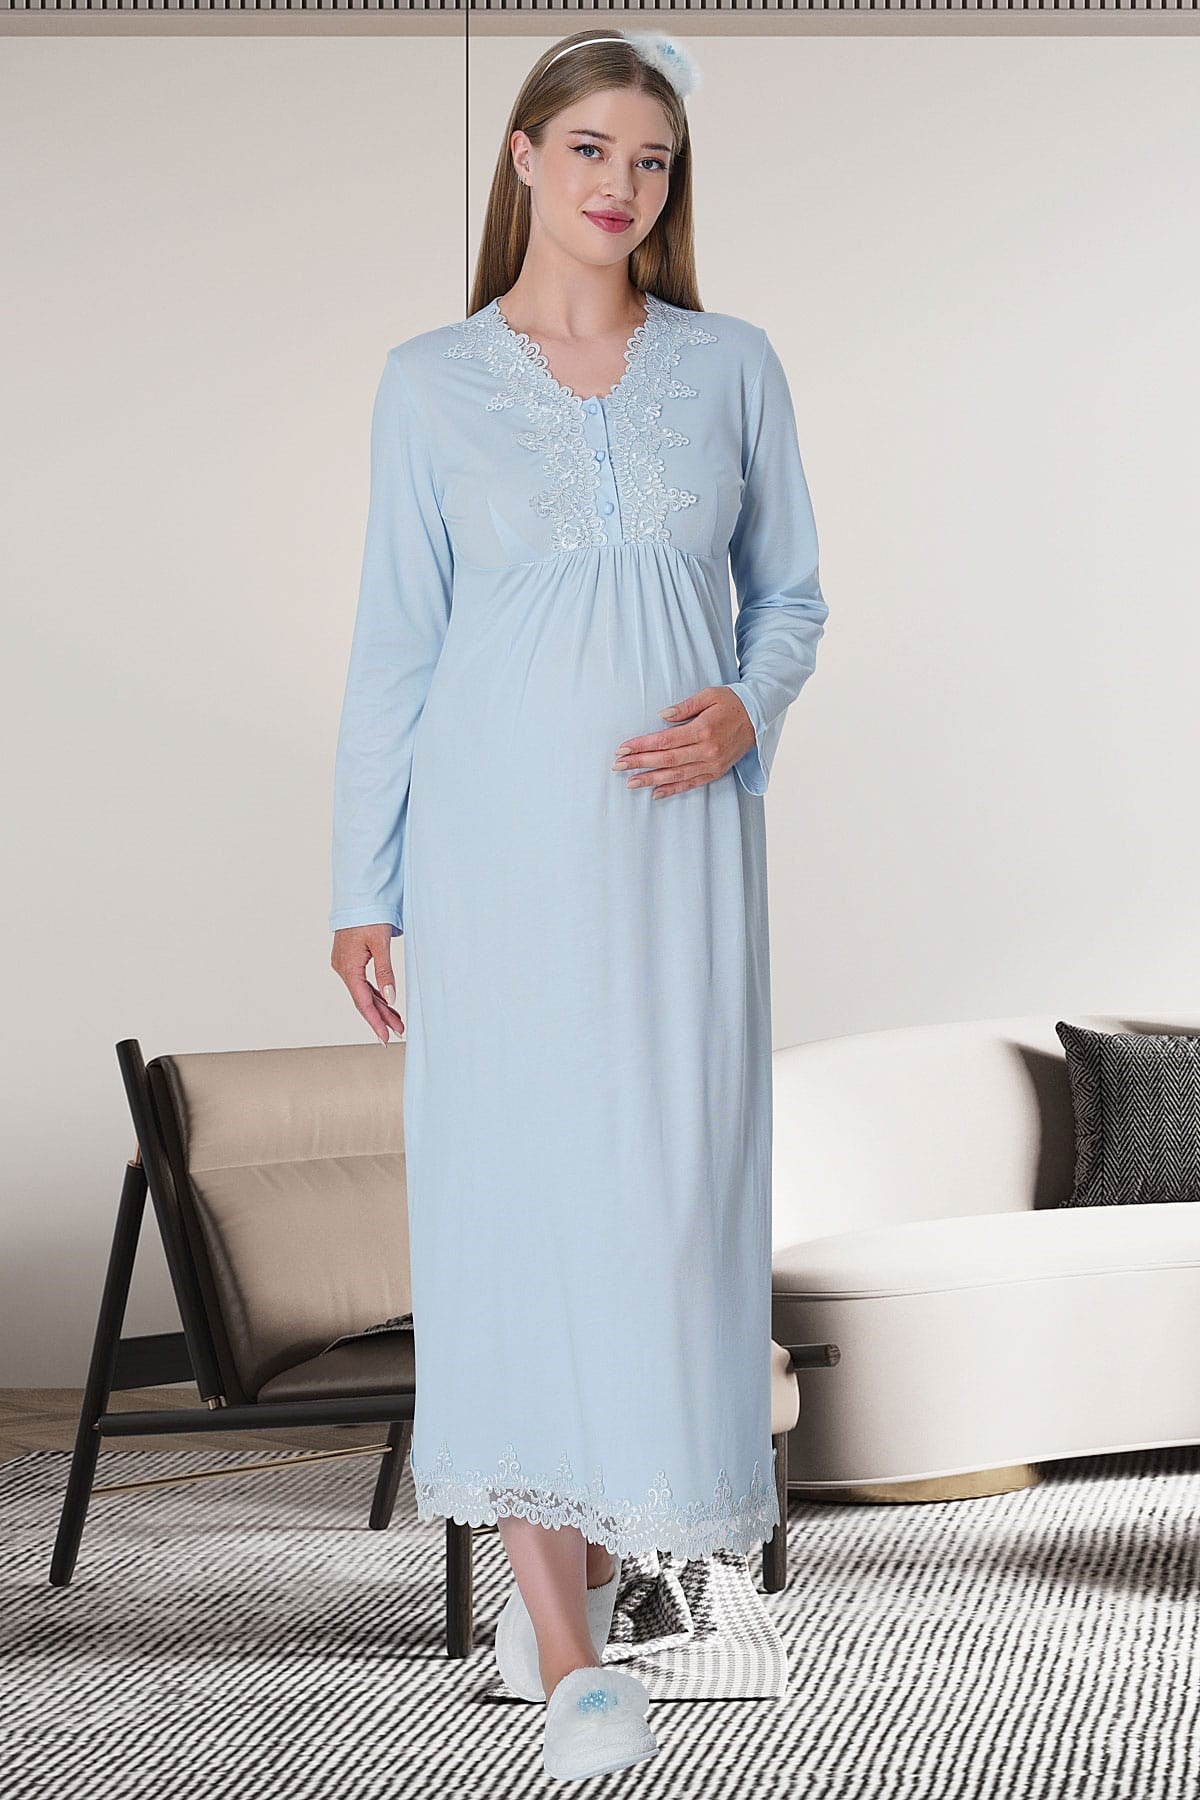 Shopymommy 5807 Lace Collar Maternity & Nursing Nightgown With Pattern